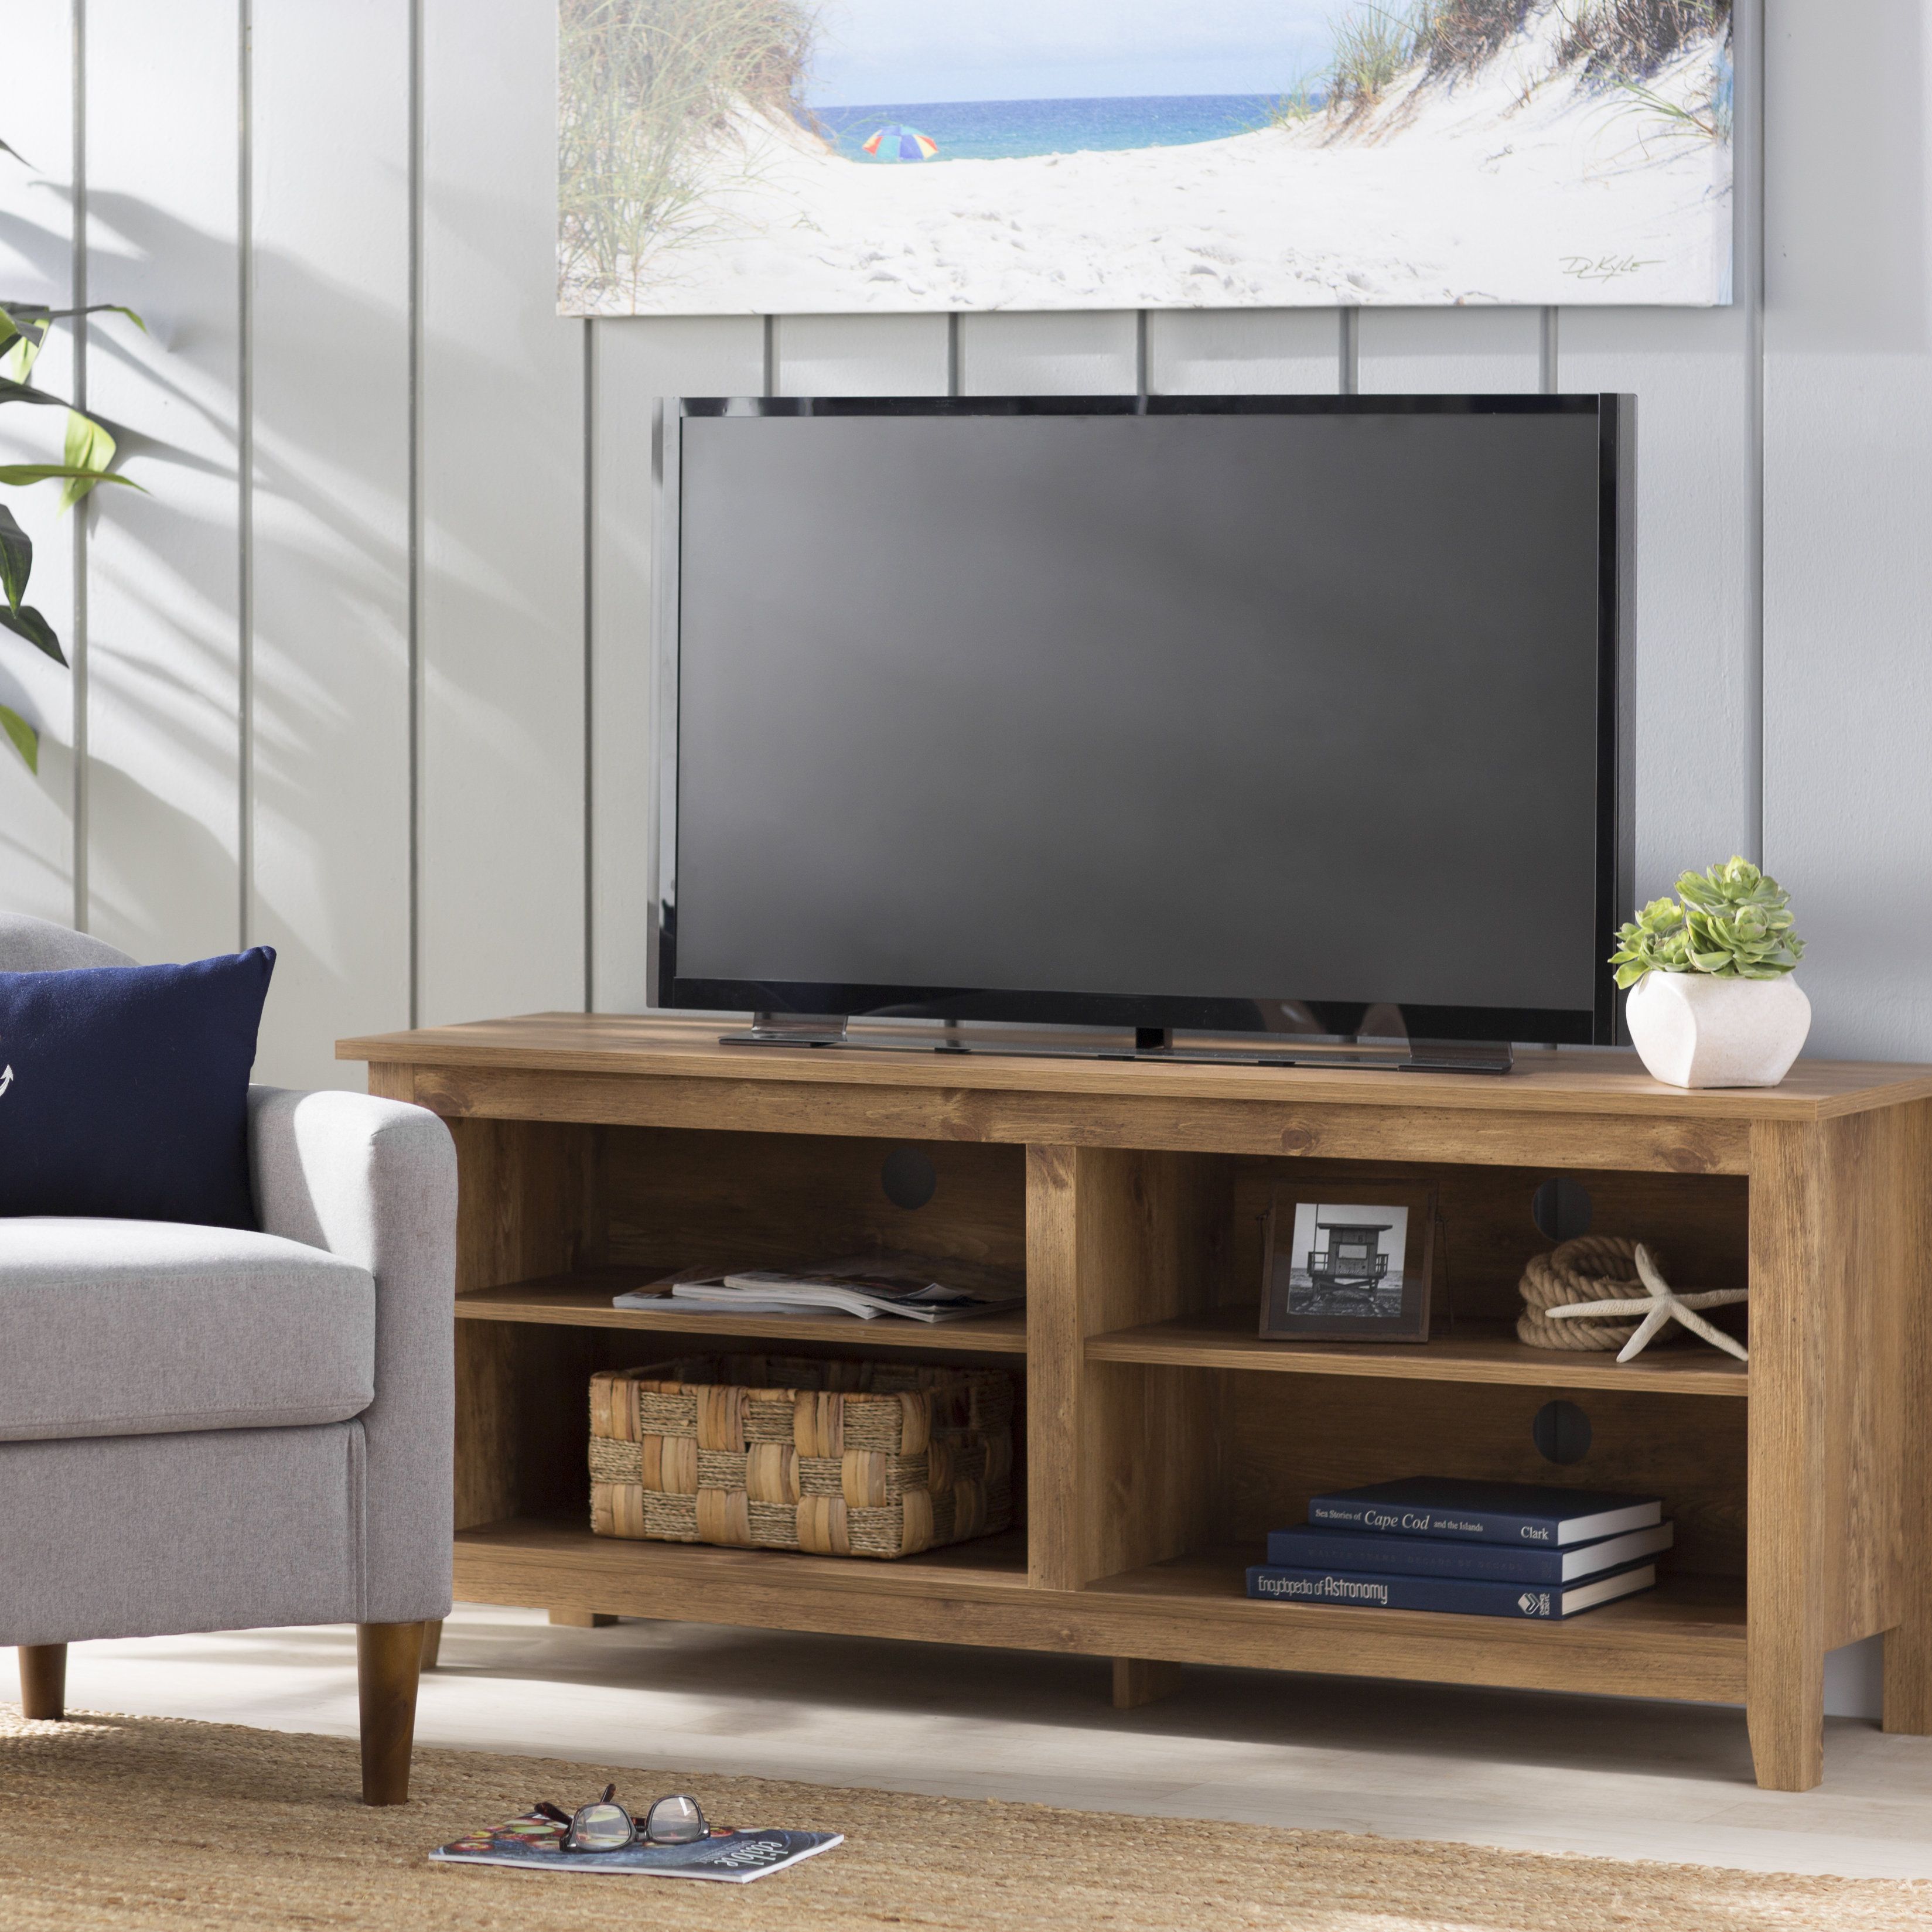 Tv Stands & Entertainment Centers You'll Love | Wayfair Intended For Sinclair White 74 Inch Tv Stands (View 19 of 30)